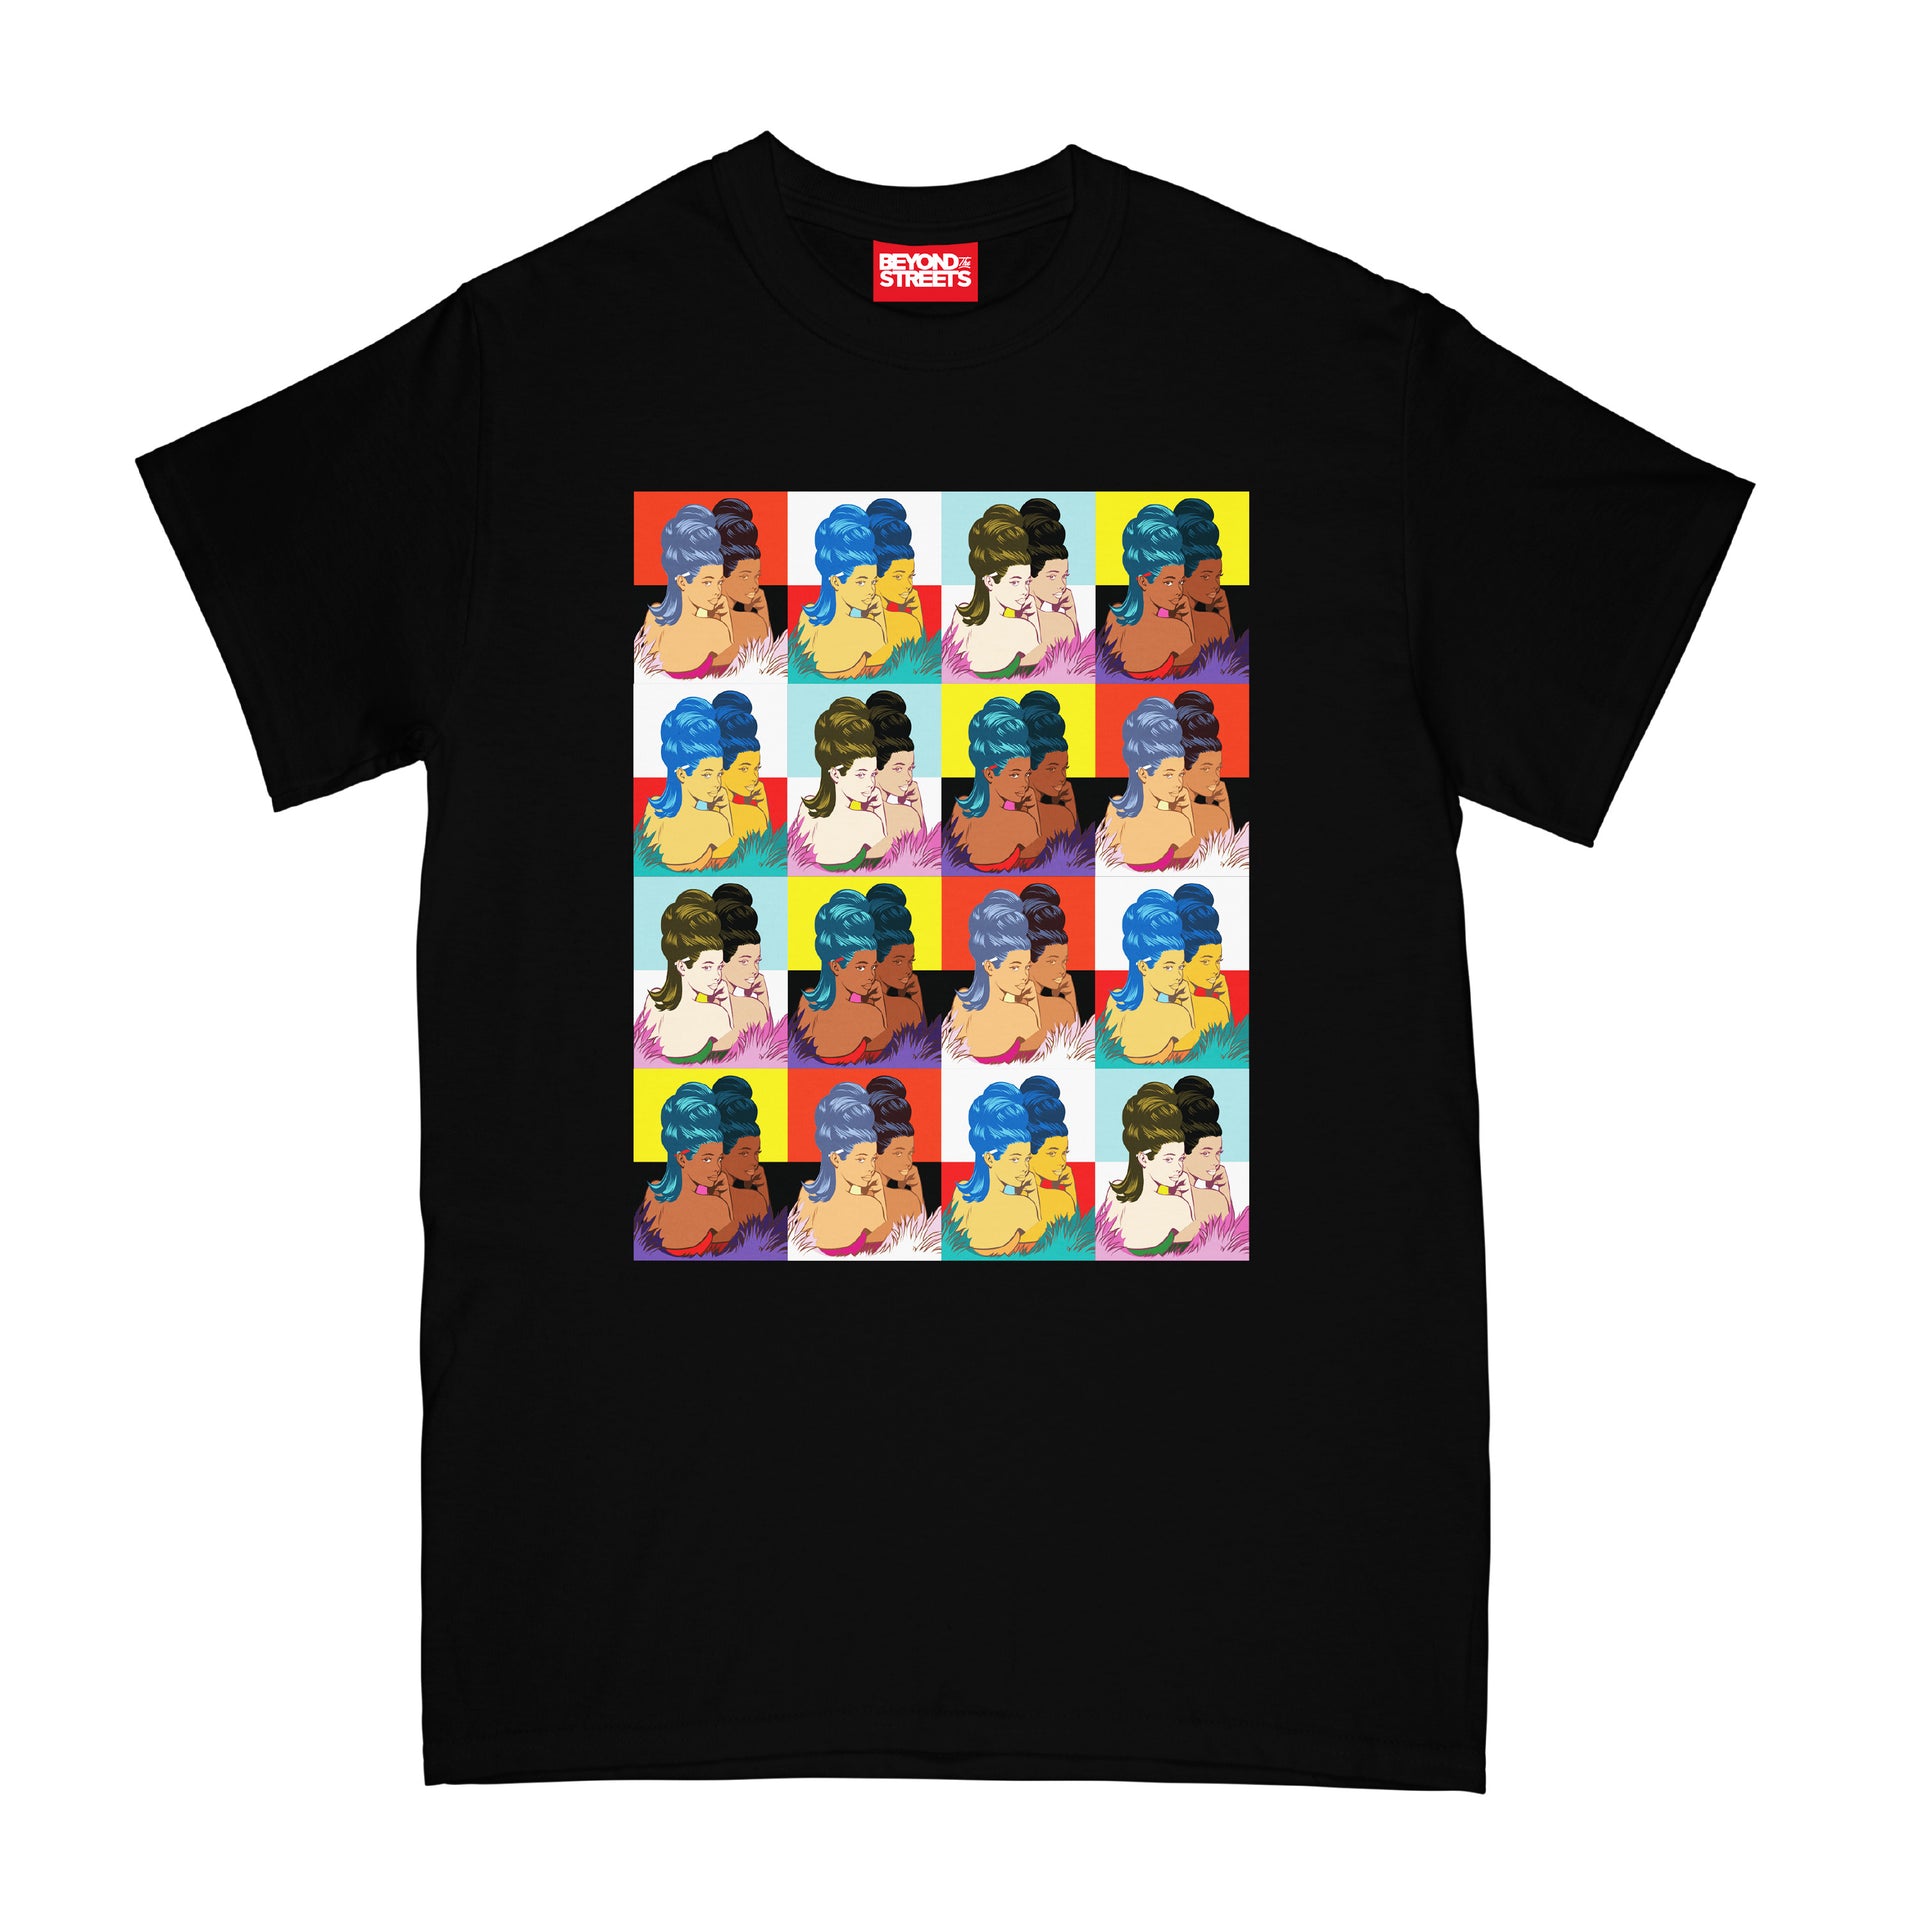 BEYOND THE STREETS x POSE "BETTY"  Tee